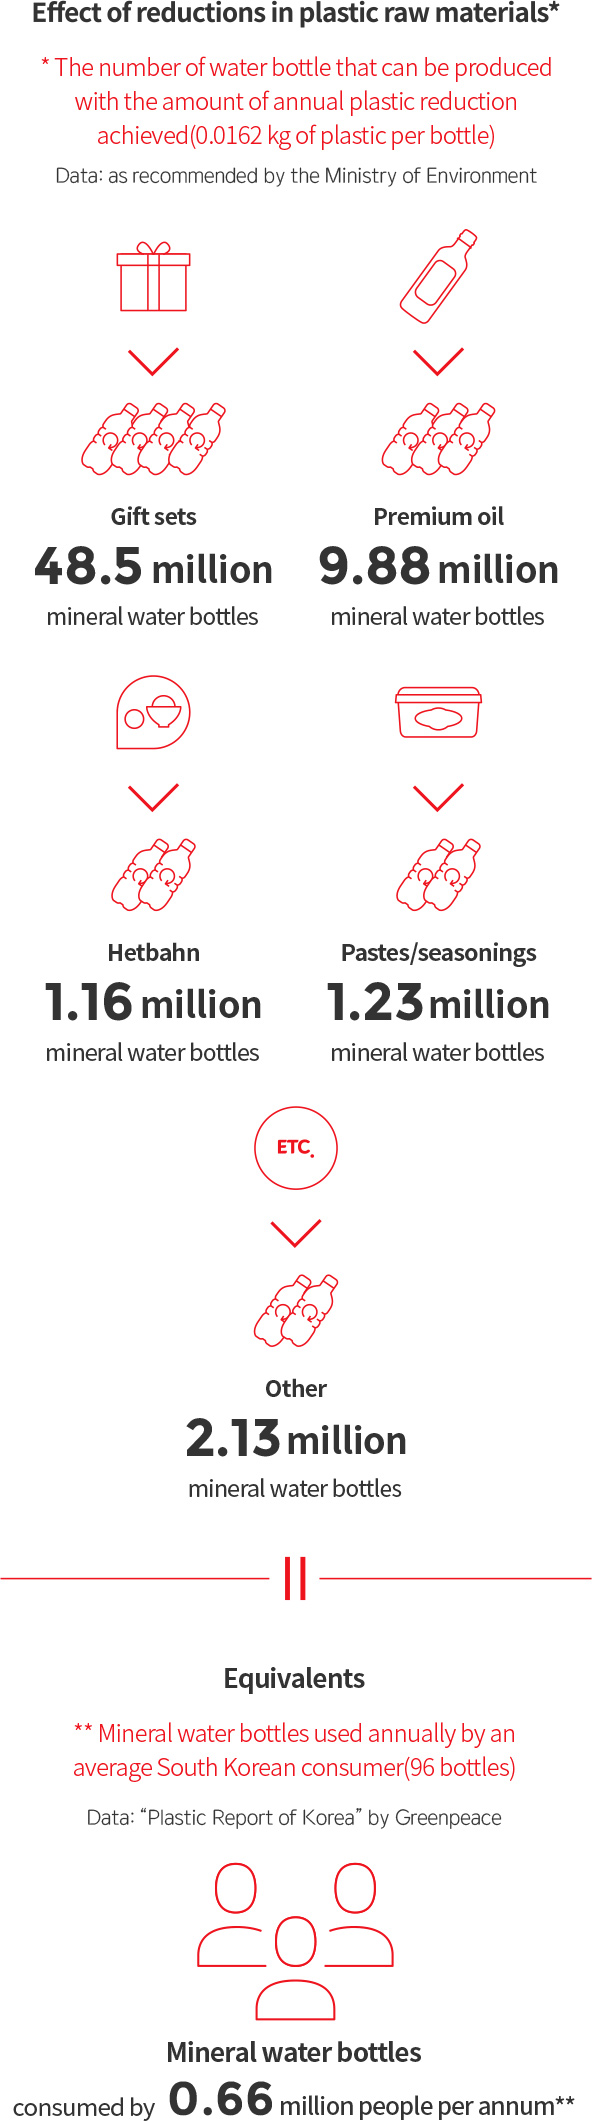 Effect of reductions in plastic raw materials : The number of water bottle that can be produced with the amount of annual plastic reduction achieved (0.0162 kg of plastic per bottle) Data: as recommended by the Ministry of Environment > Gift sets 48.5 million. Premium oil 9.88 million > Hetbahn 1.16 million > Pastes/seasonings 1.23 million > Other 2.13 million mineral water bottles. Equivalents : Mineral water bottles used annually by an average South Korean consumer (96 bottles) Data: “Plastic Report of Korea” by Greenpeace > Mineral water bottles consumed by 0.66 million people per annum